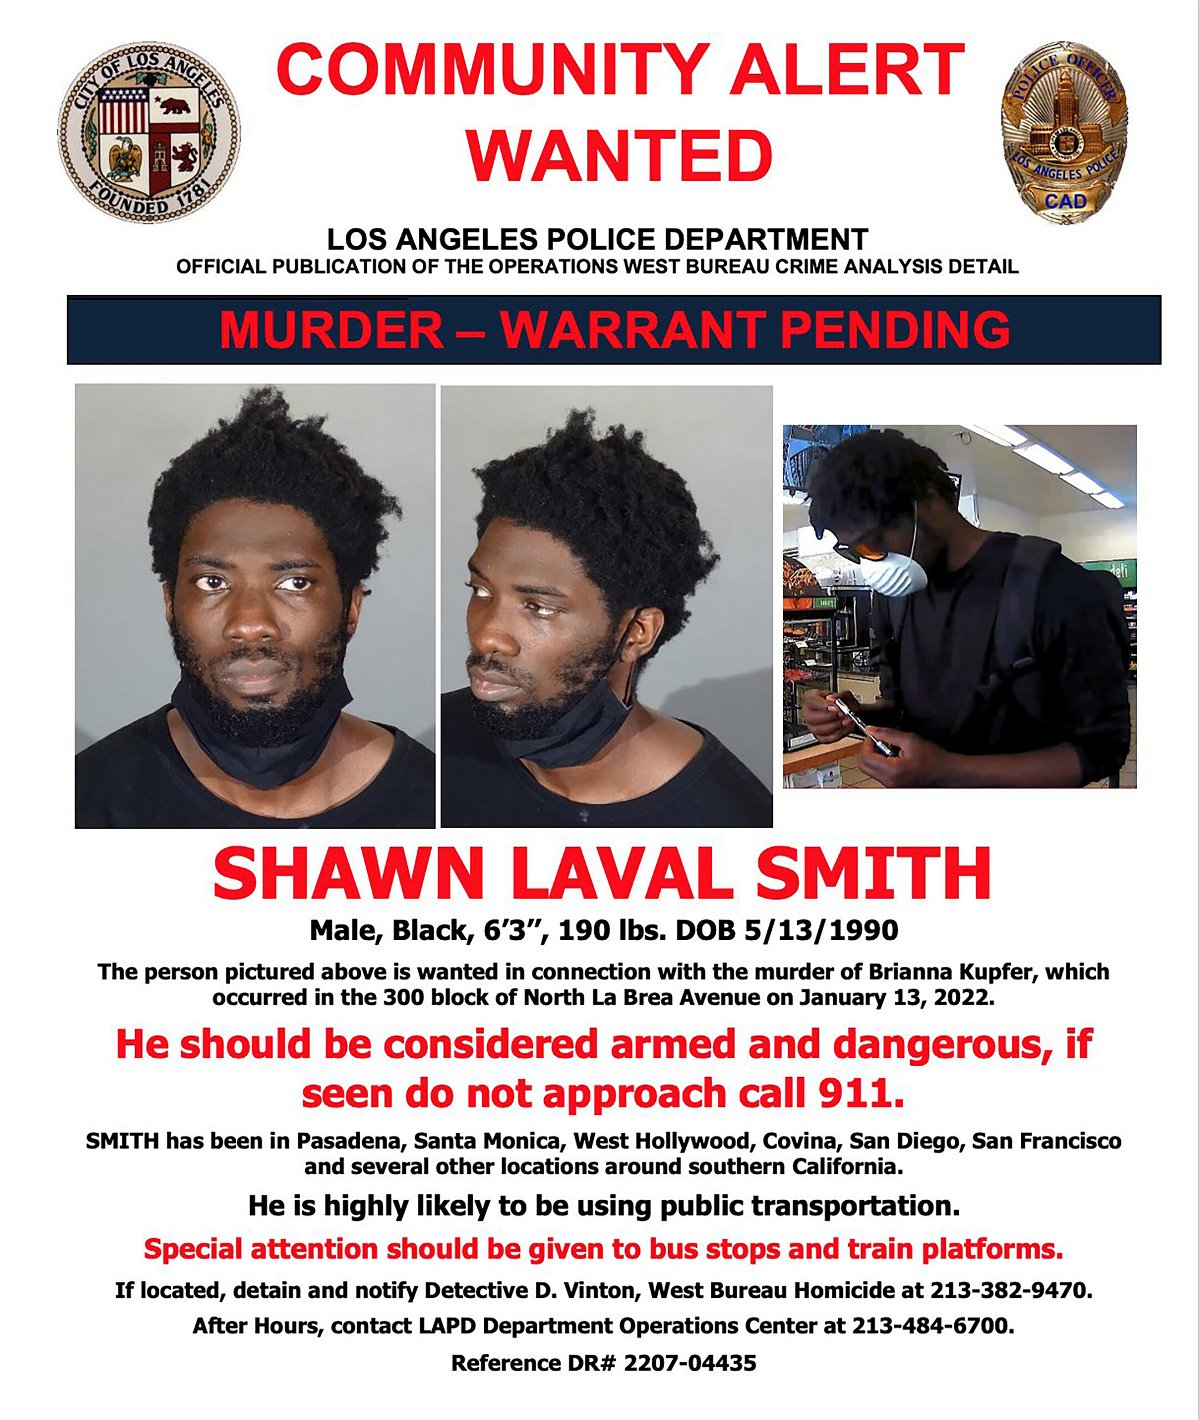 <i>Los Angeles Police Department</i><br/>Los Angeles police identified Shawn Laval Smith as a suspect in the death of a store employee in the city's Hancock Park neighborhood.